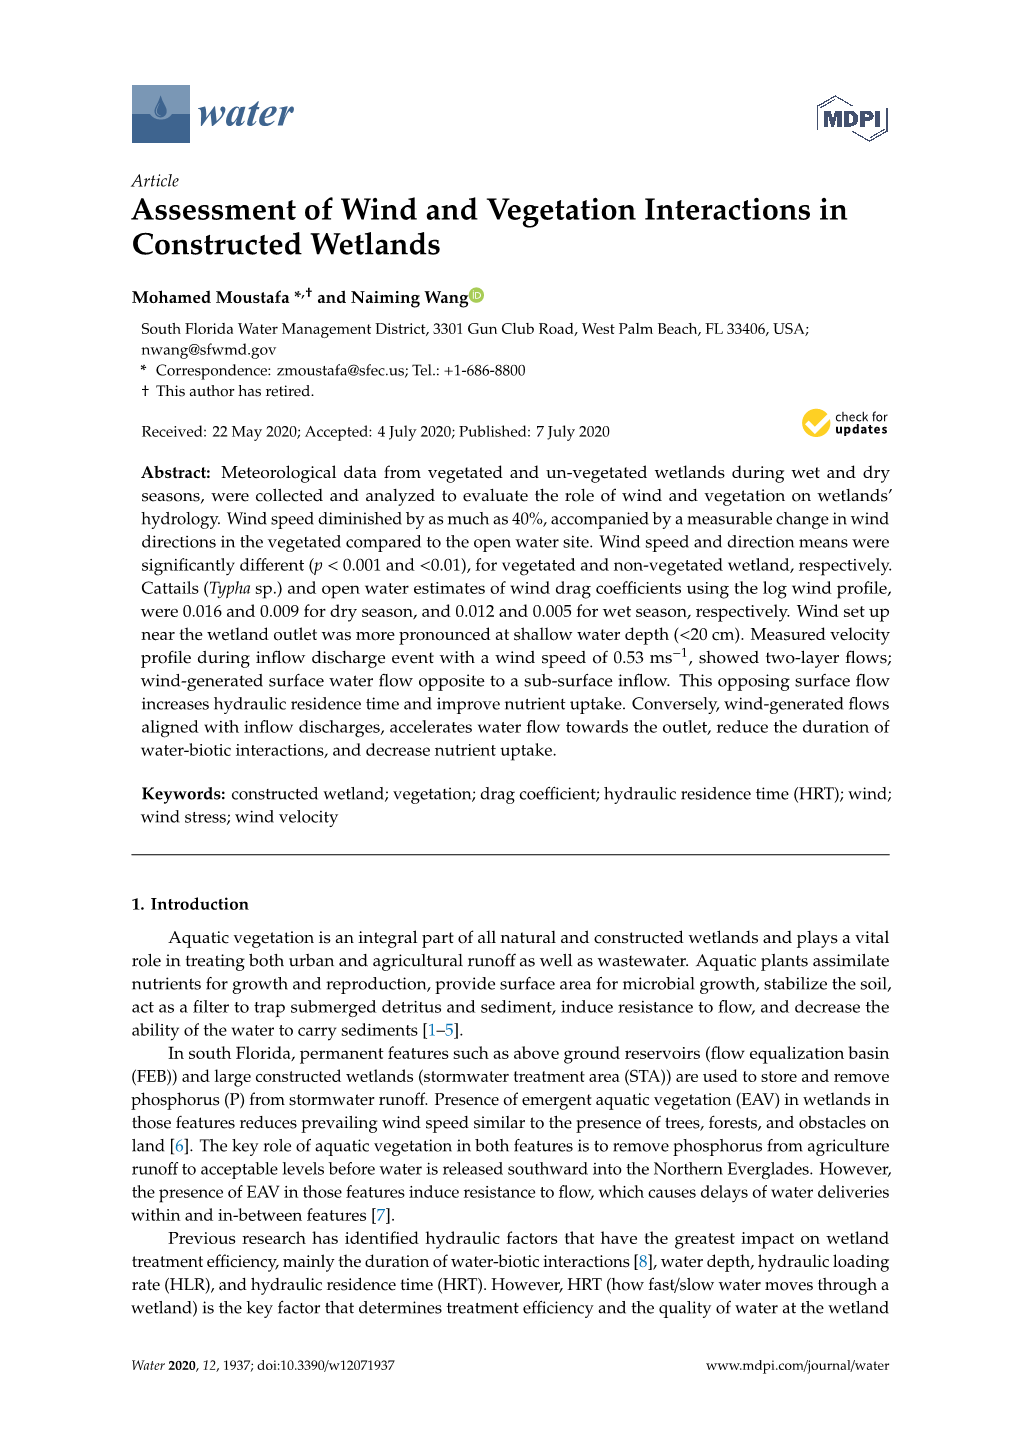 Assessment of Wind and Vegetation Interactions in Constructed Wetlands